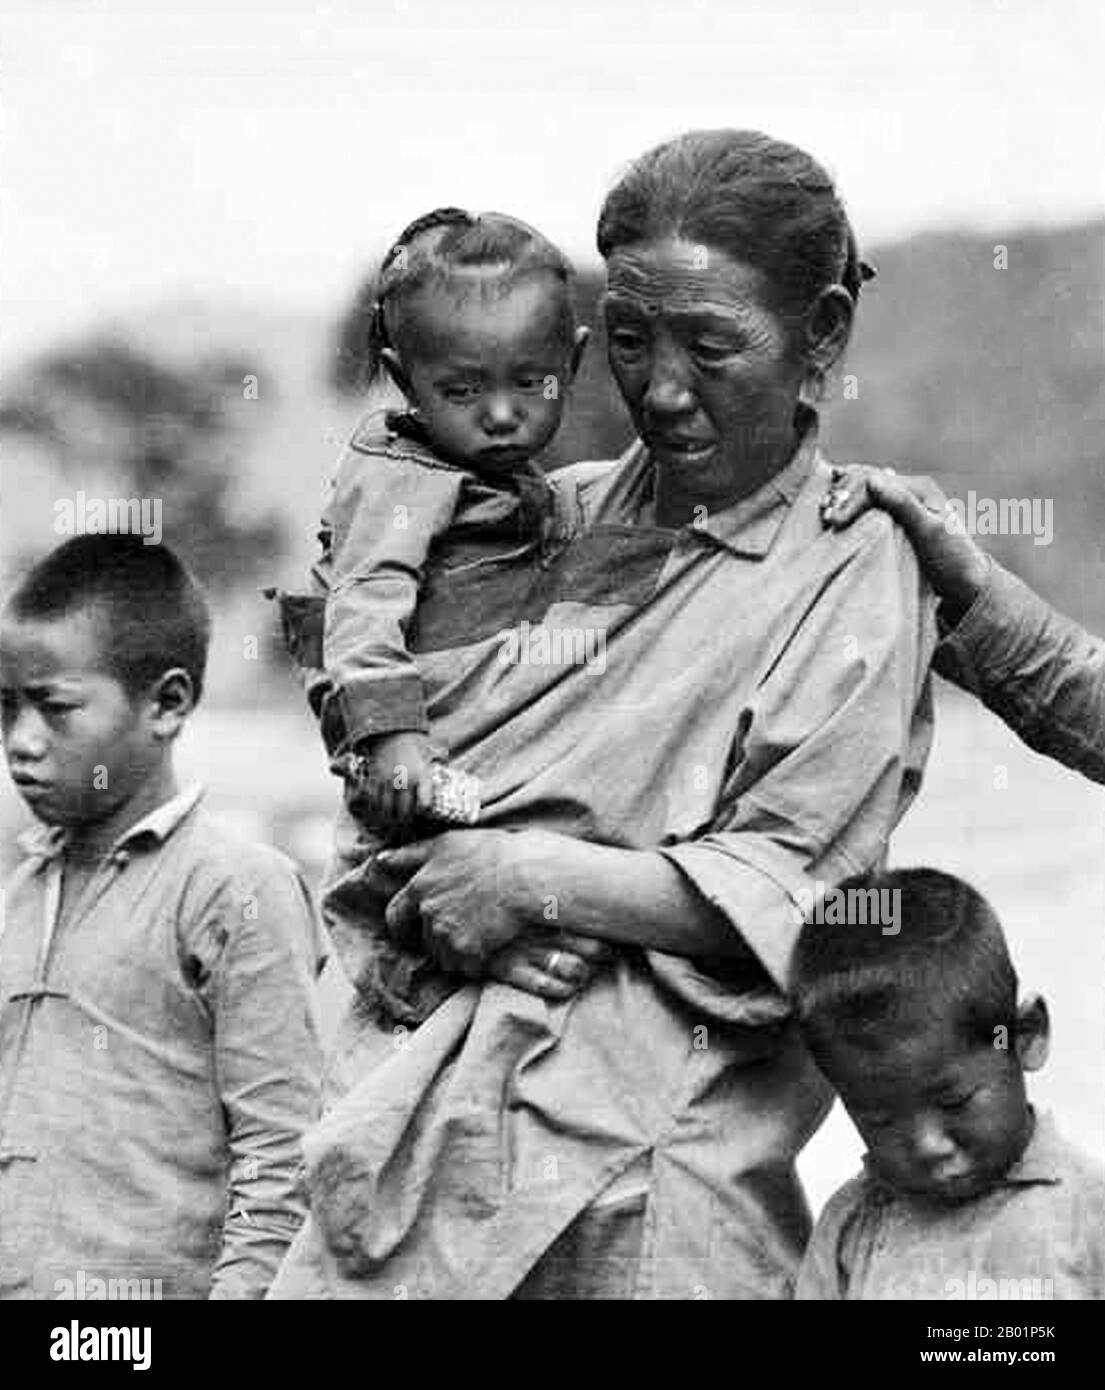 China: Victims of the disastrous Great Chinese Famine produced by the Great Leap Forward (1958-1961). Between 18 and 42 million people died of starvation.  The Great Leap Forward of the People's Republic of China (PRC) was an economic and social campaign of the Communist Party of China (CPC), reflected in planning decisions from 1958 to 1961, which aimed to use China's vast population to rapidly transform the country from an agrarian economy into a modern communist society through the process of rapid industrialisation, and collectivisation. The campaign was spearheaded by Mao Zedong. Stock Photo